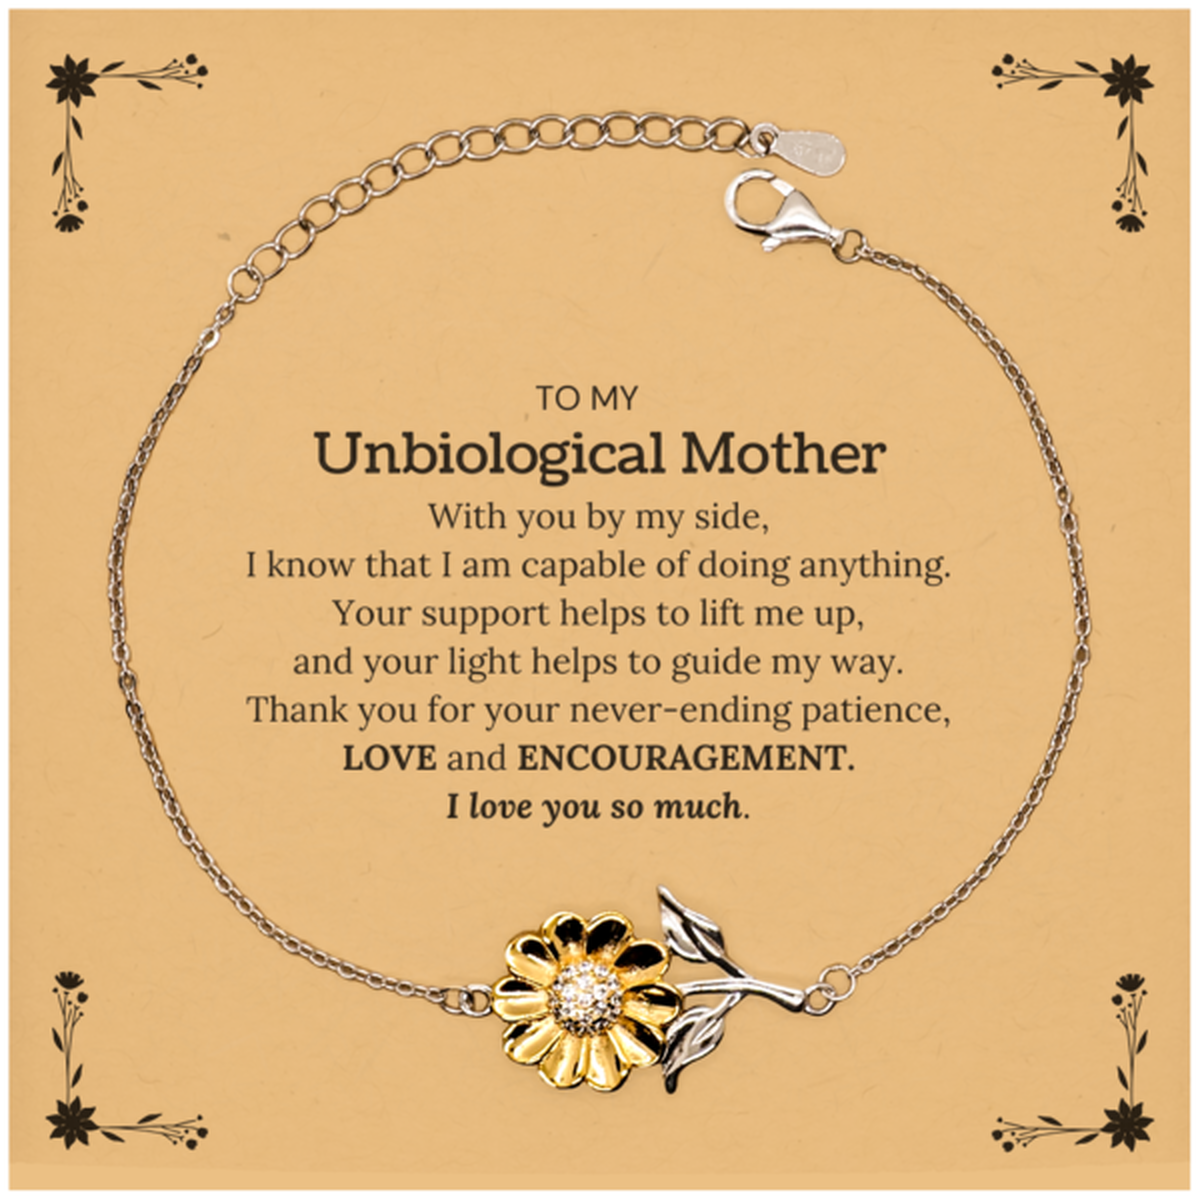 Appreciation Unbiological Mother Sunflower Bracelet Gifts, To My Unbiological Mother Birthday Christmas Wedding Keepsake Gifts for Unbiological Mother With you by my side, I know that I am capable of doing anything. I love you so much